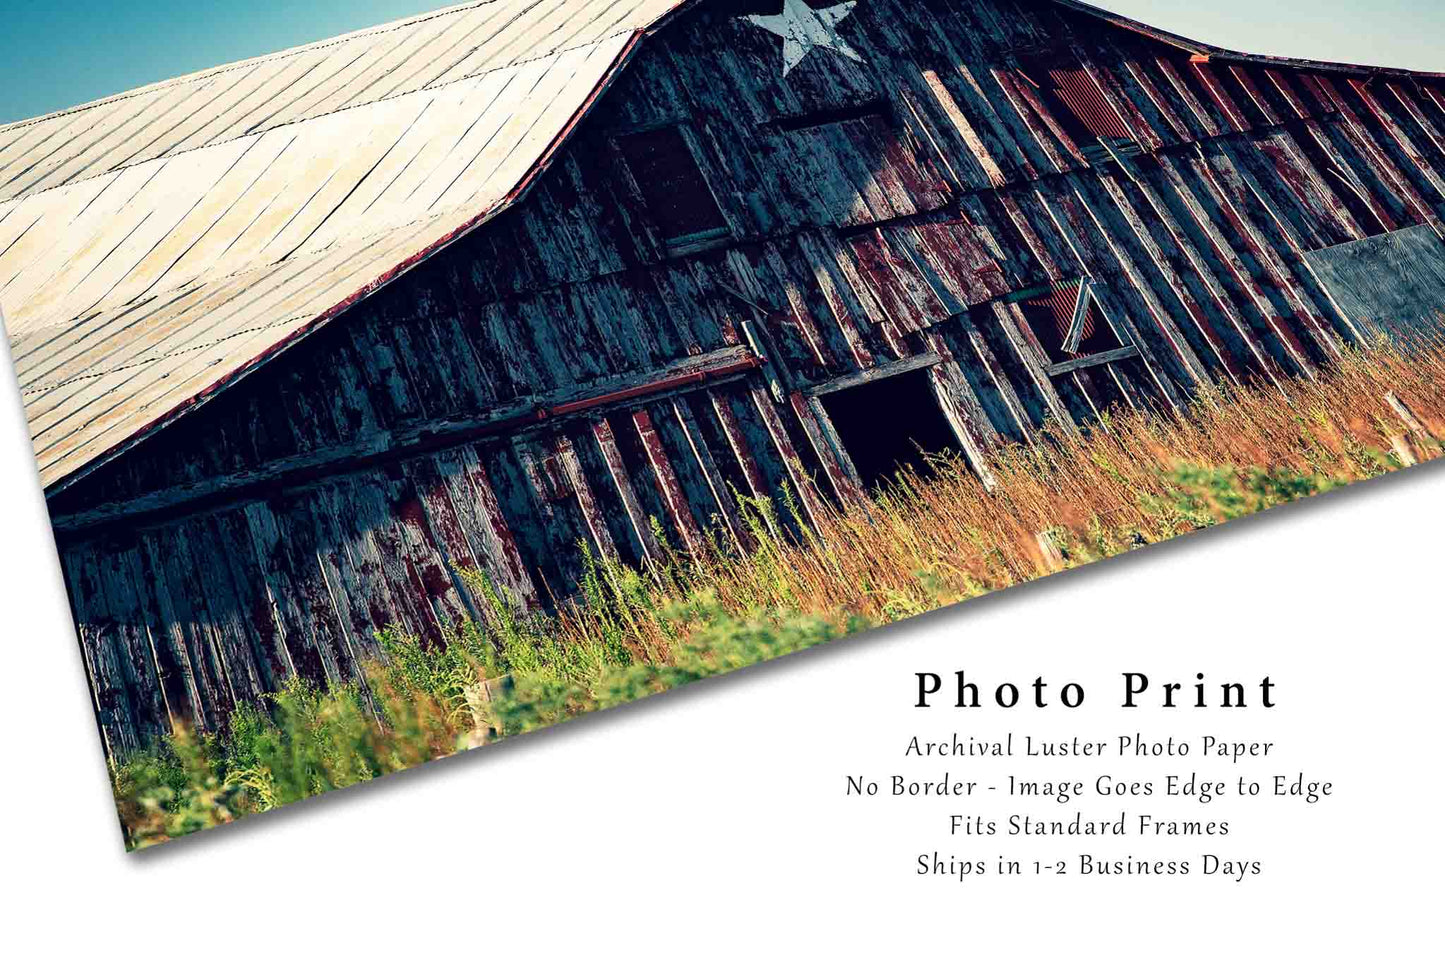 Farmhouse Wall Art - Picture of Rustic Red Barn with Painted Star in Oklahoma - Farm Photography Country Photo Print Artwork Decor